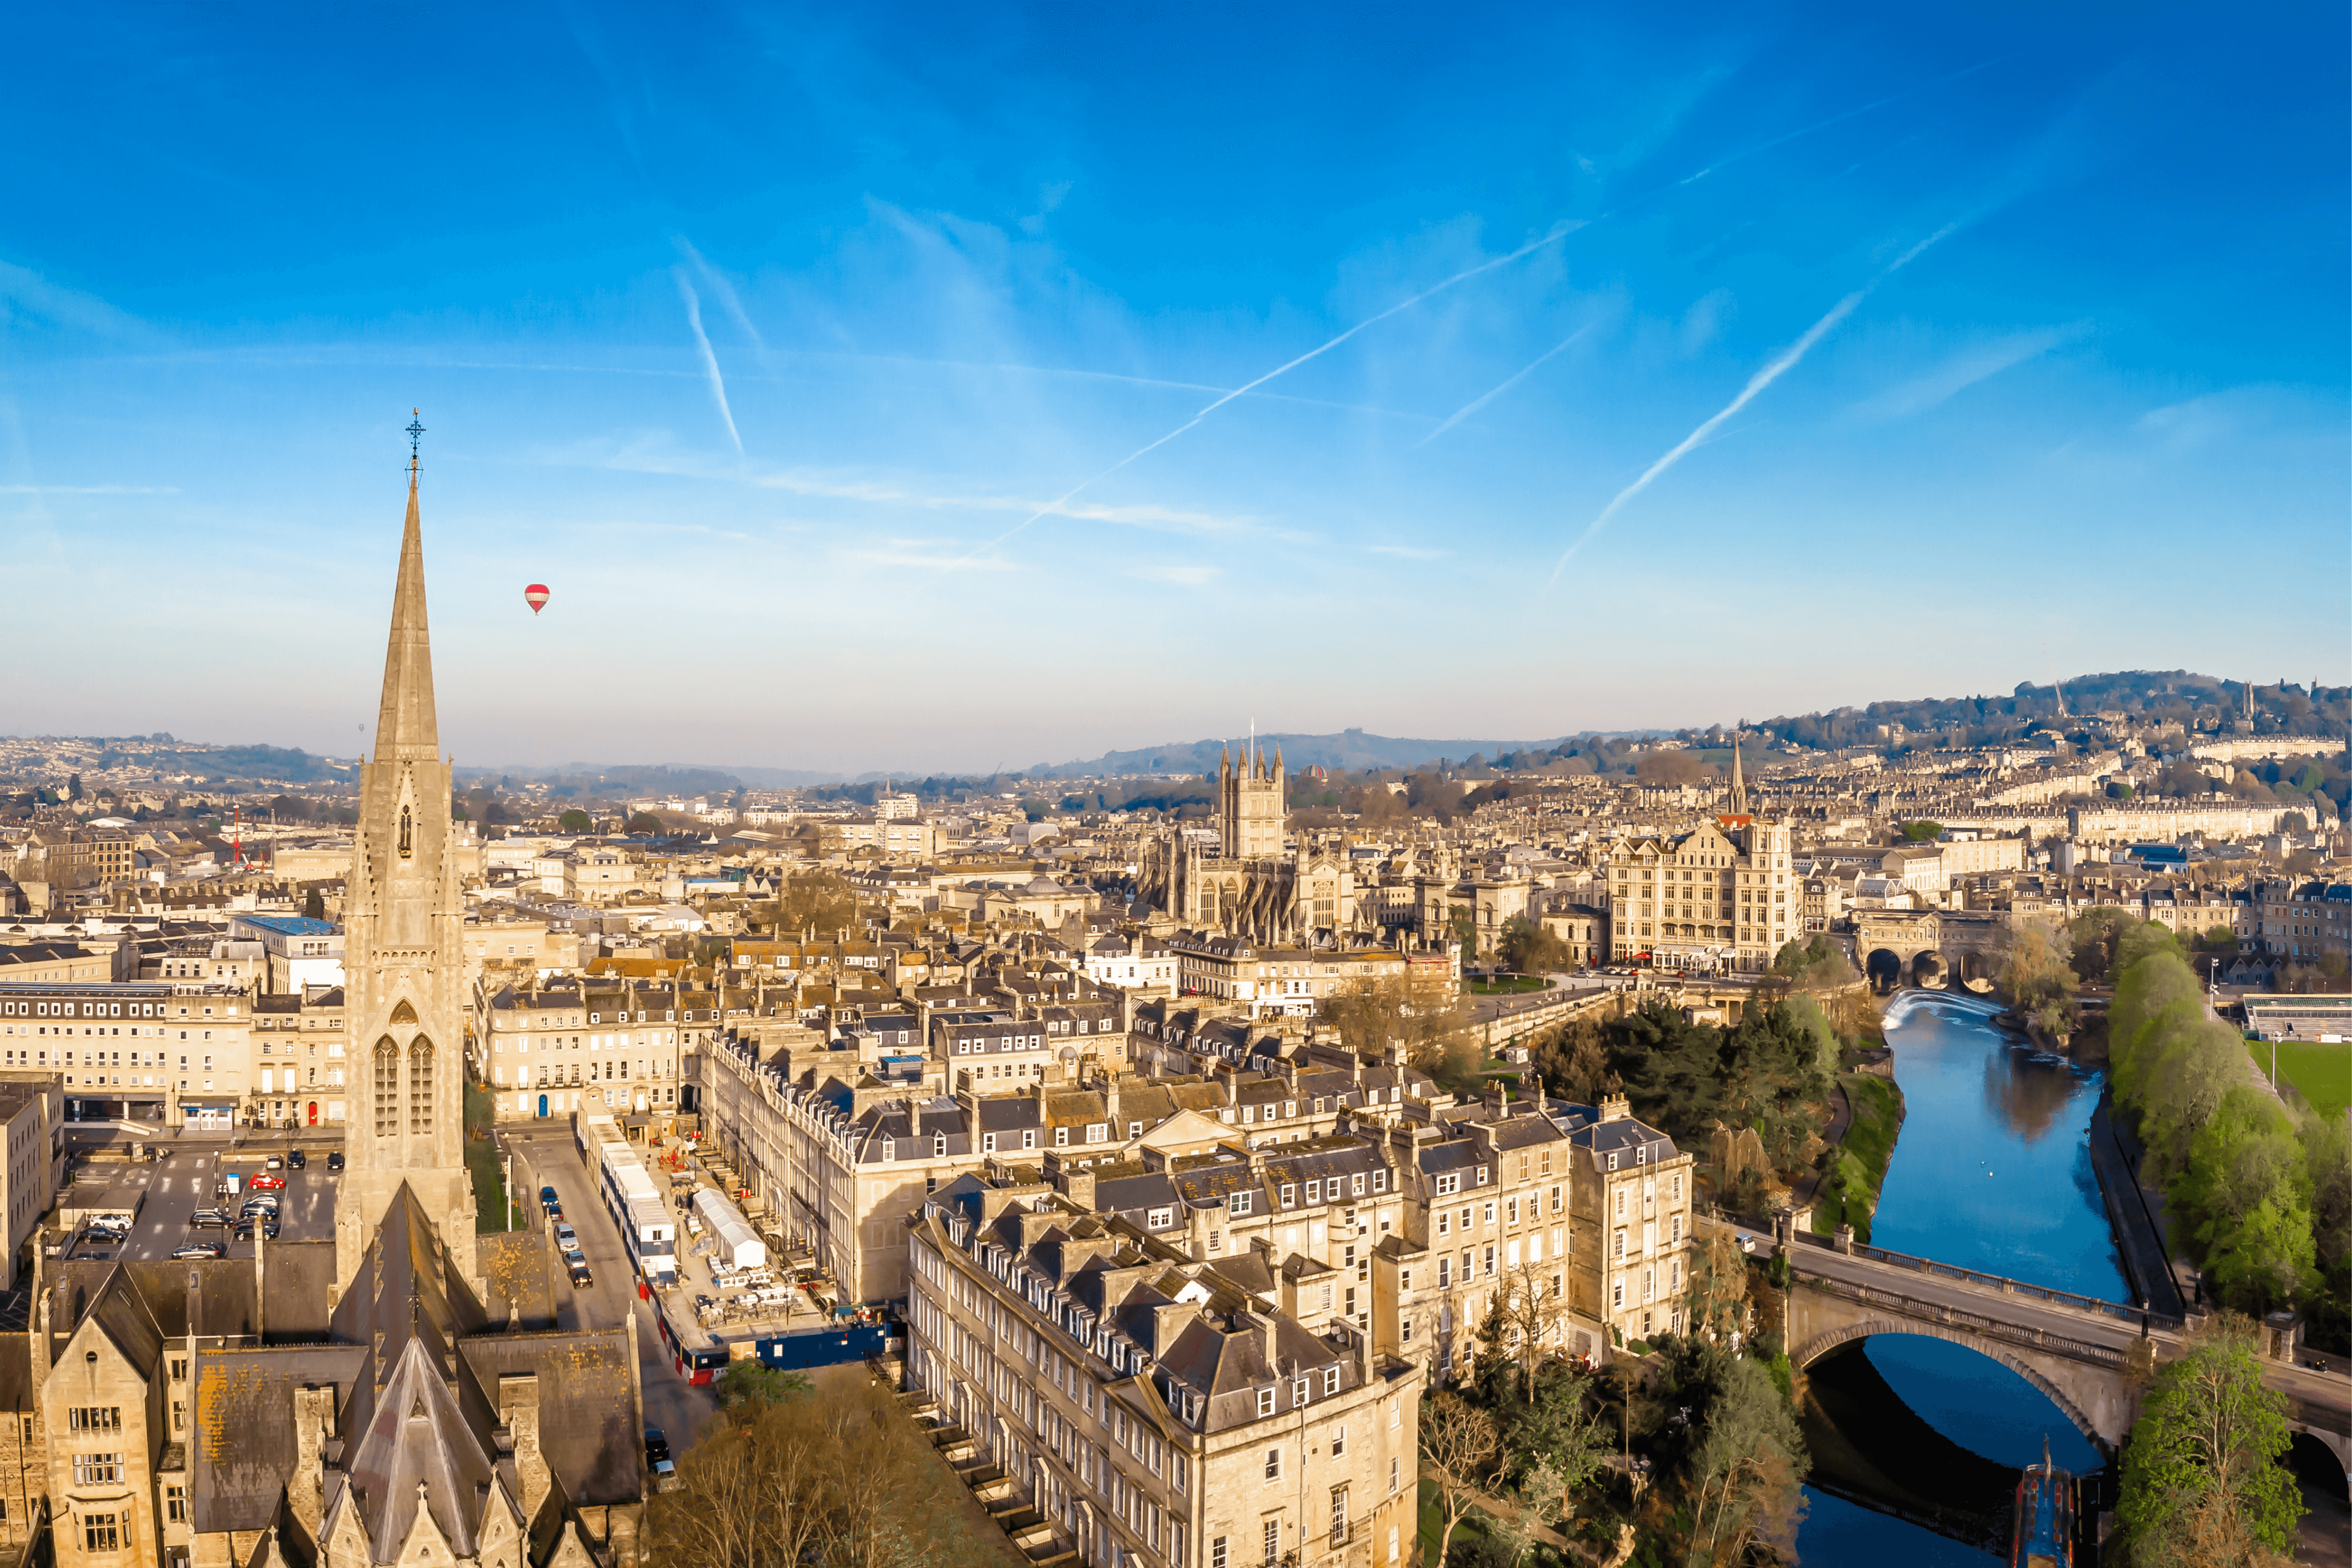 How to Do a Fun Day Trip to Bath from London